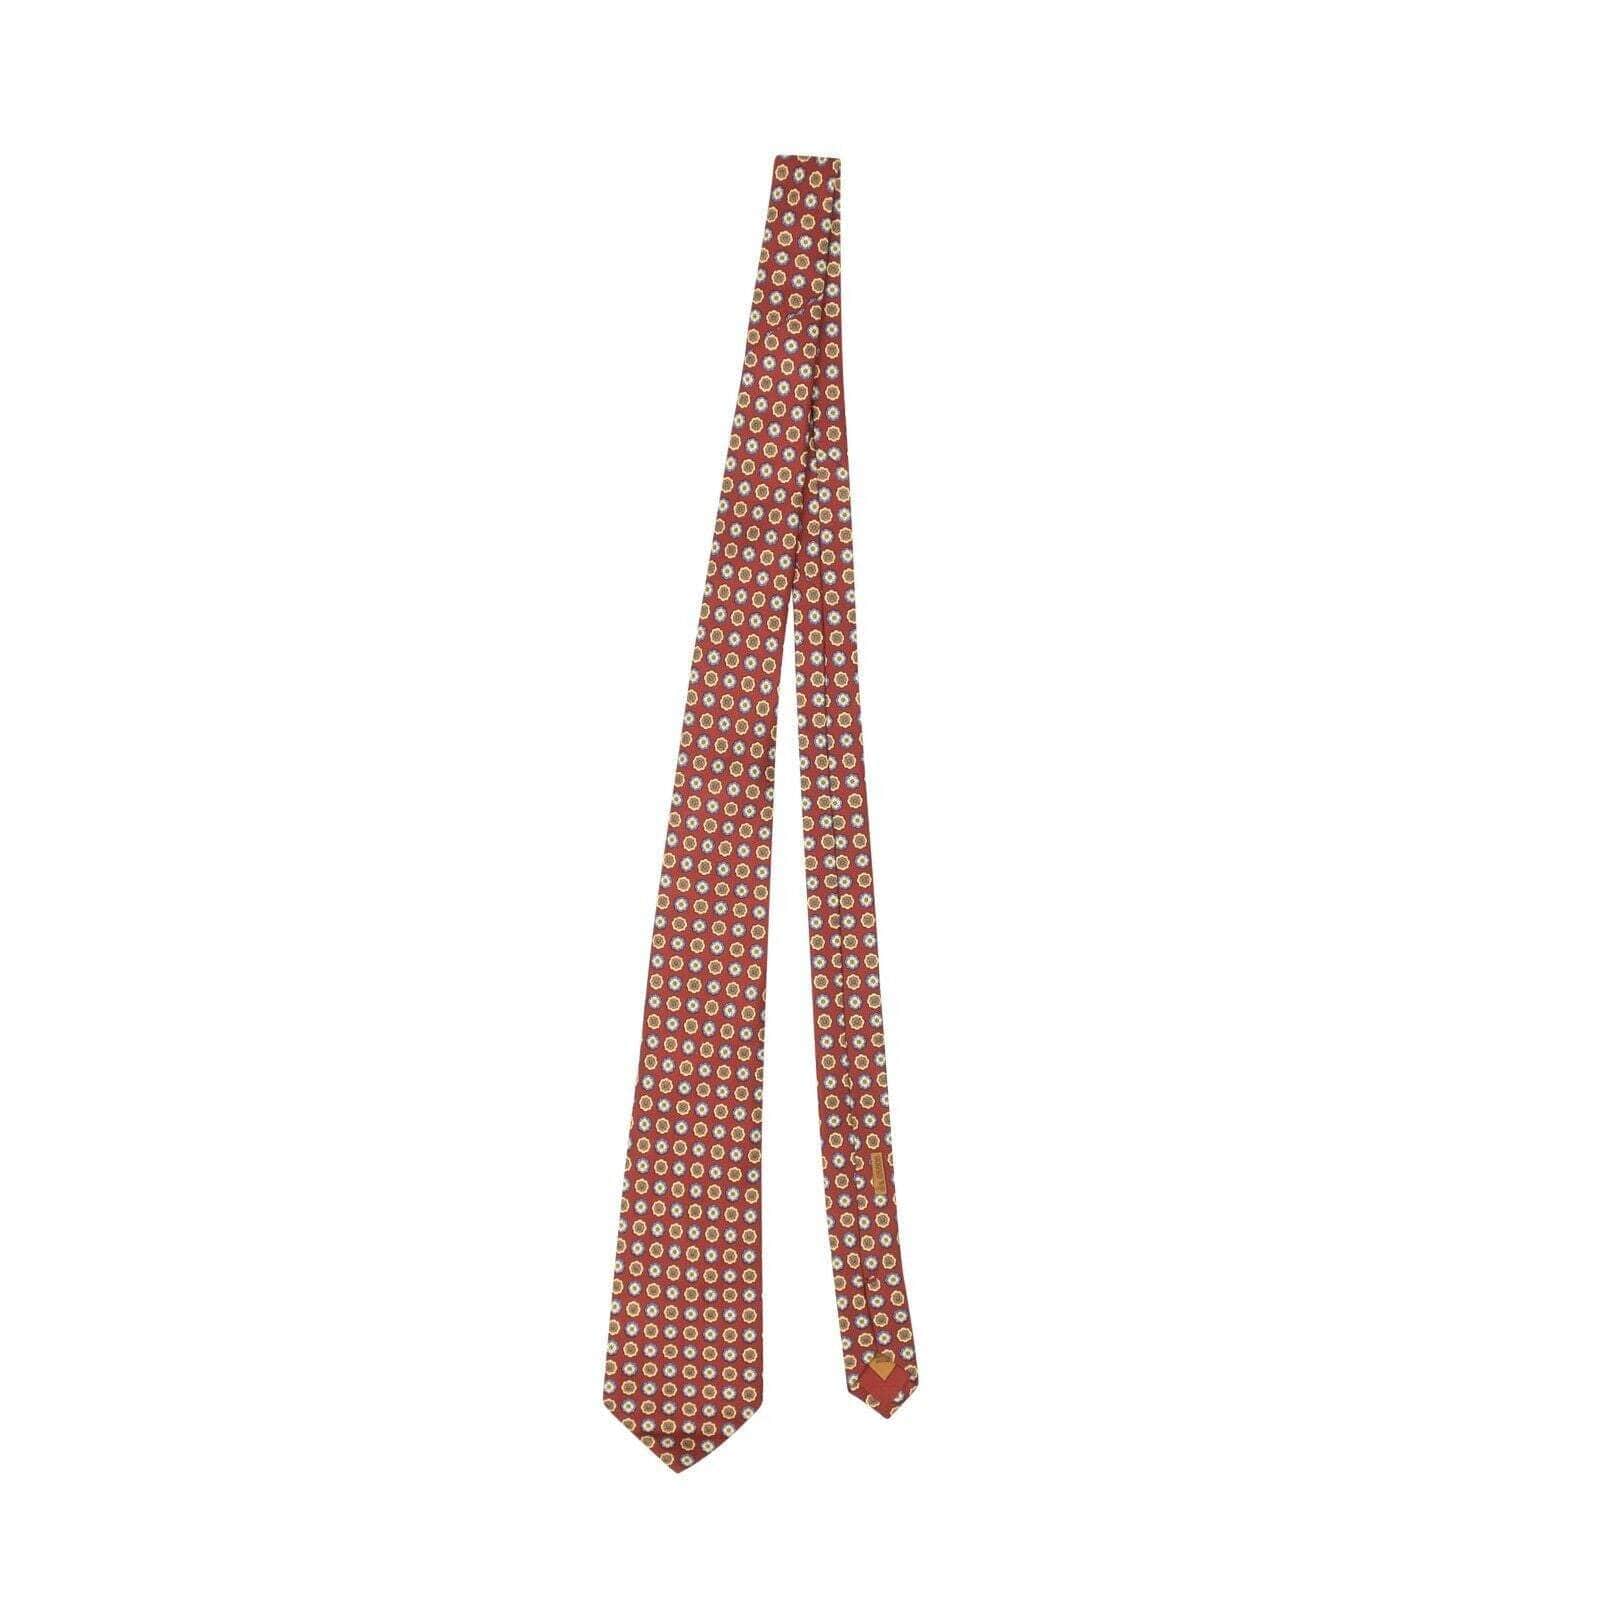 Brioni couponcollection, gender-mens, main-accessories, mens-shoes, size-os, under-250 OS Brick Red Silk Handmade Flowers Tie 95-BNI-3004/OS 95-BNI-3004/OS